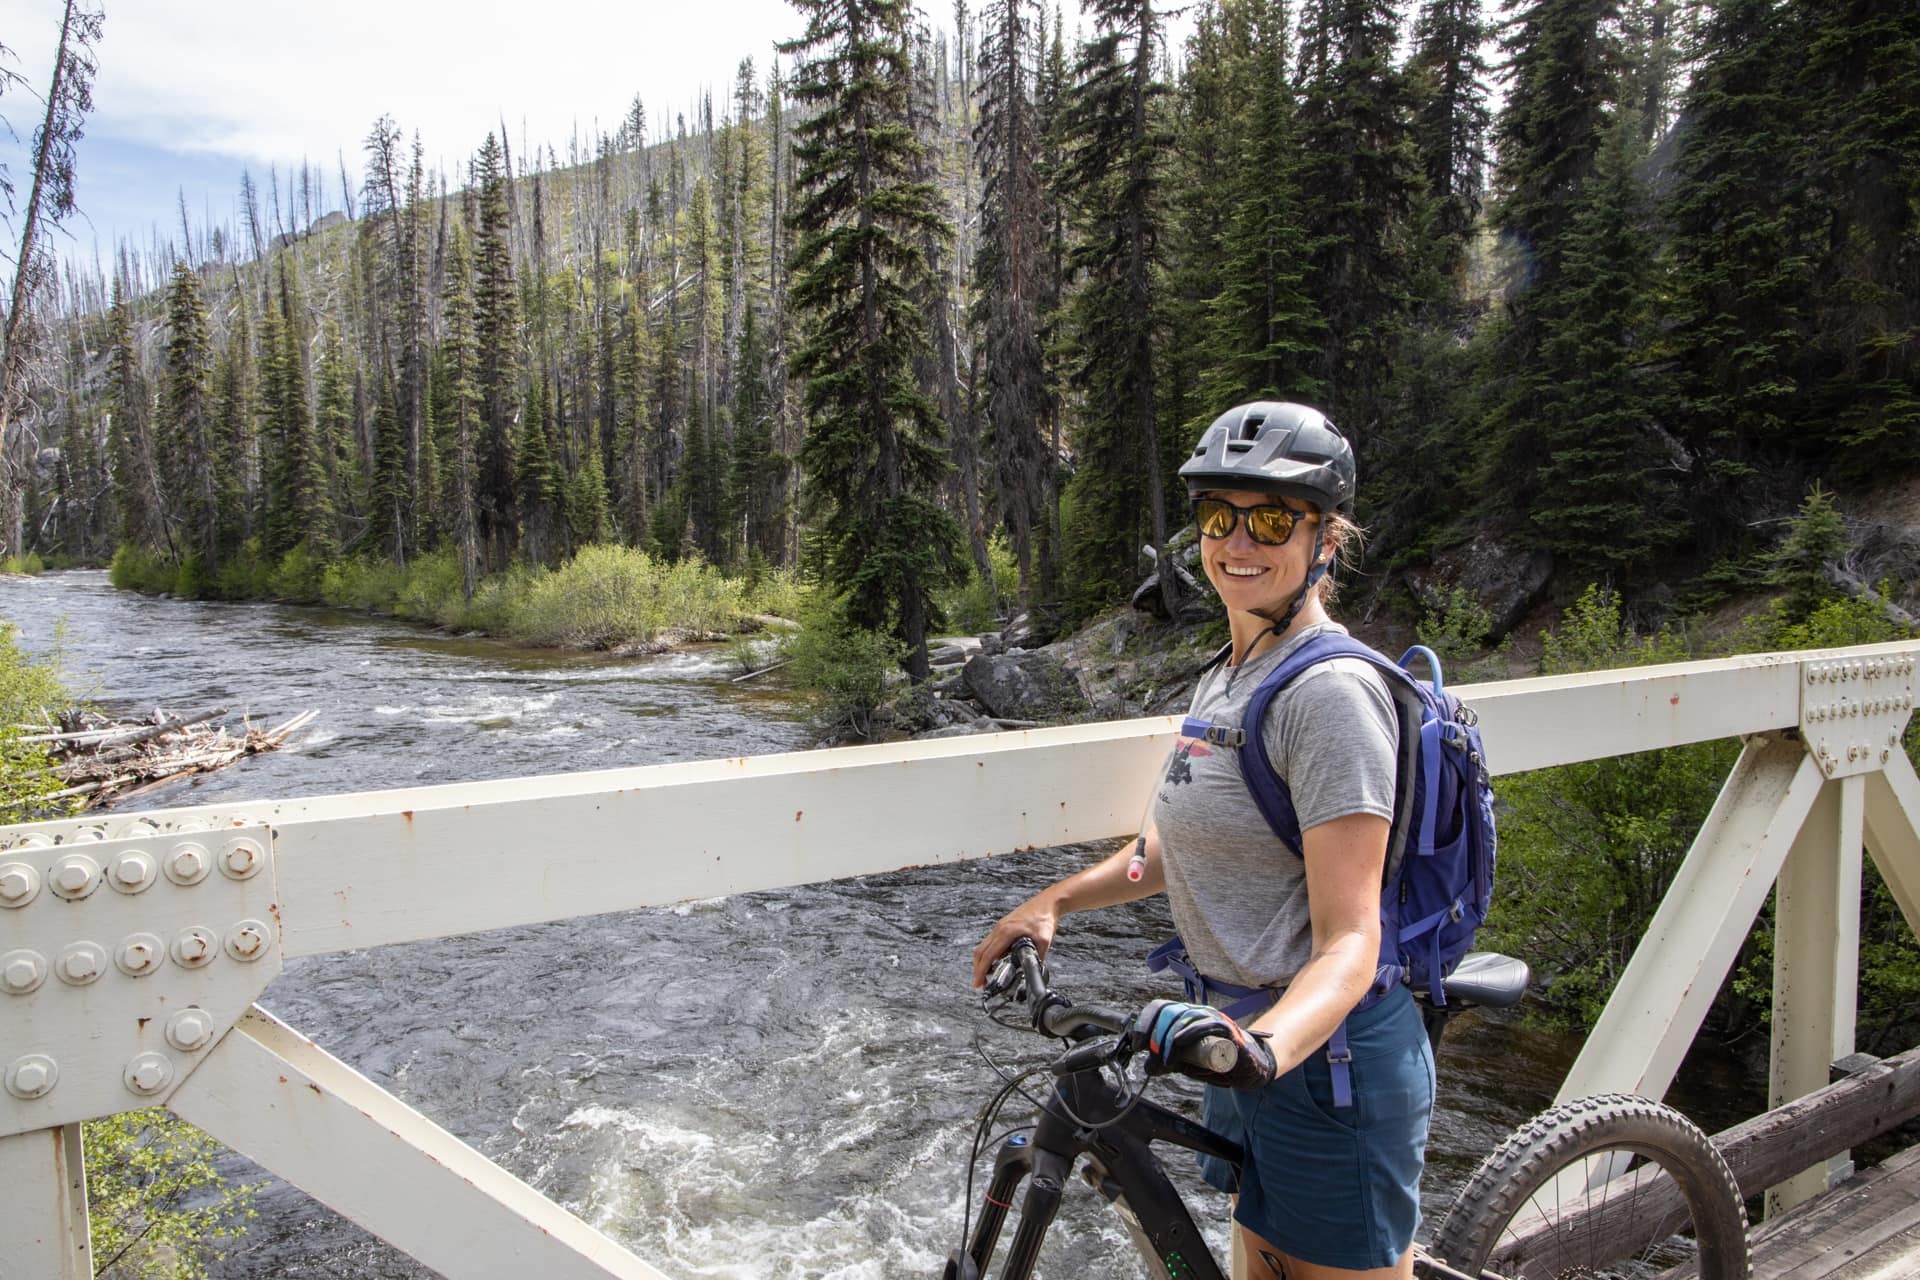 Biking the Loon Lake Loop in McCall, Idaho // An outdoor enthusiast's guide to the best hiking, hot springs, biking, rafting, and more summer outdoor activities while visiting McCall, Idaho.